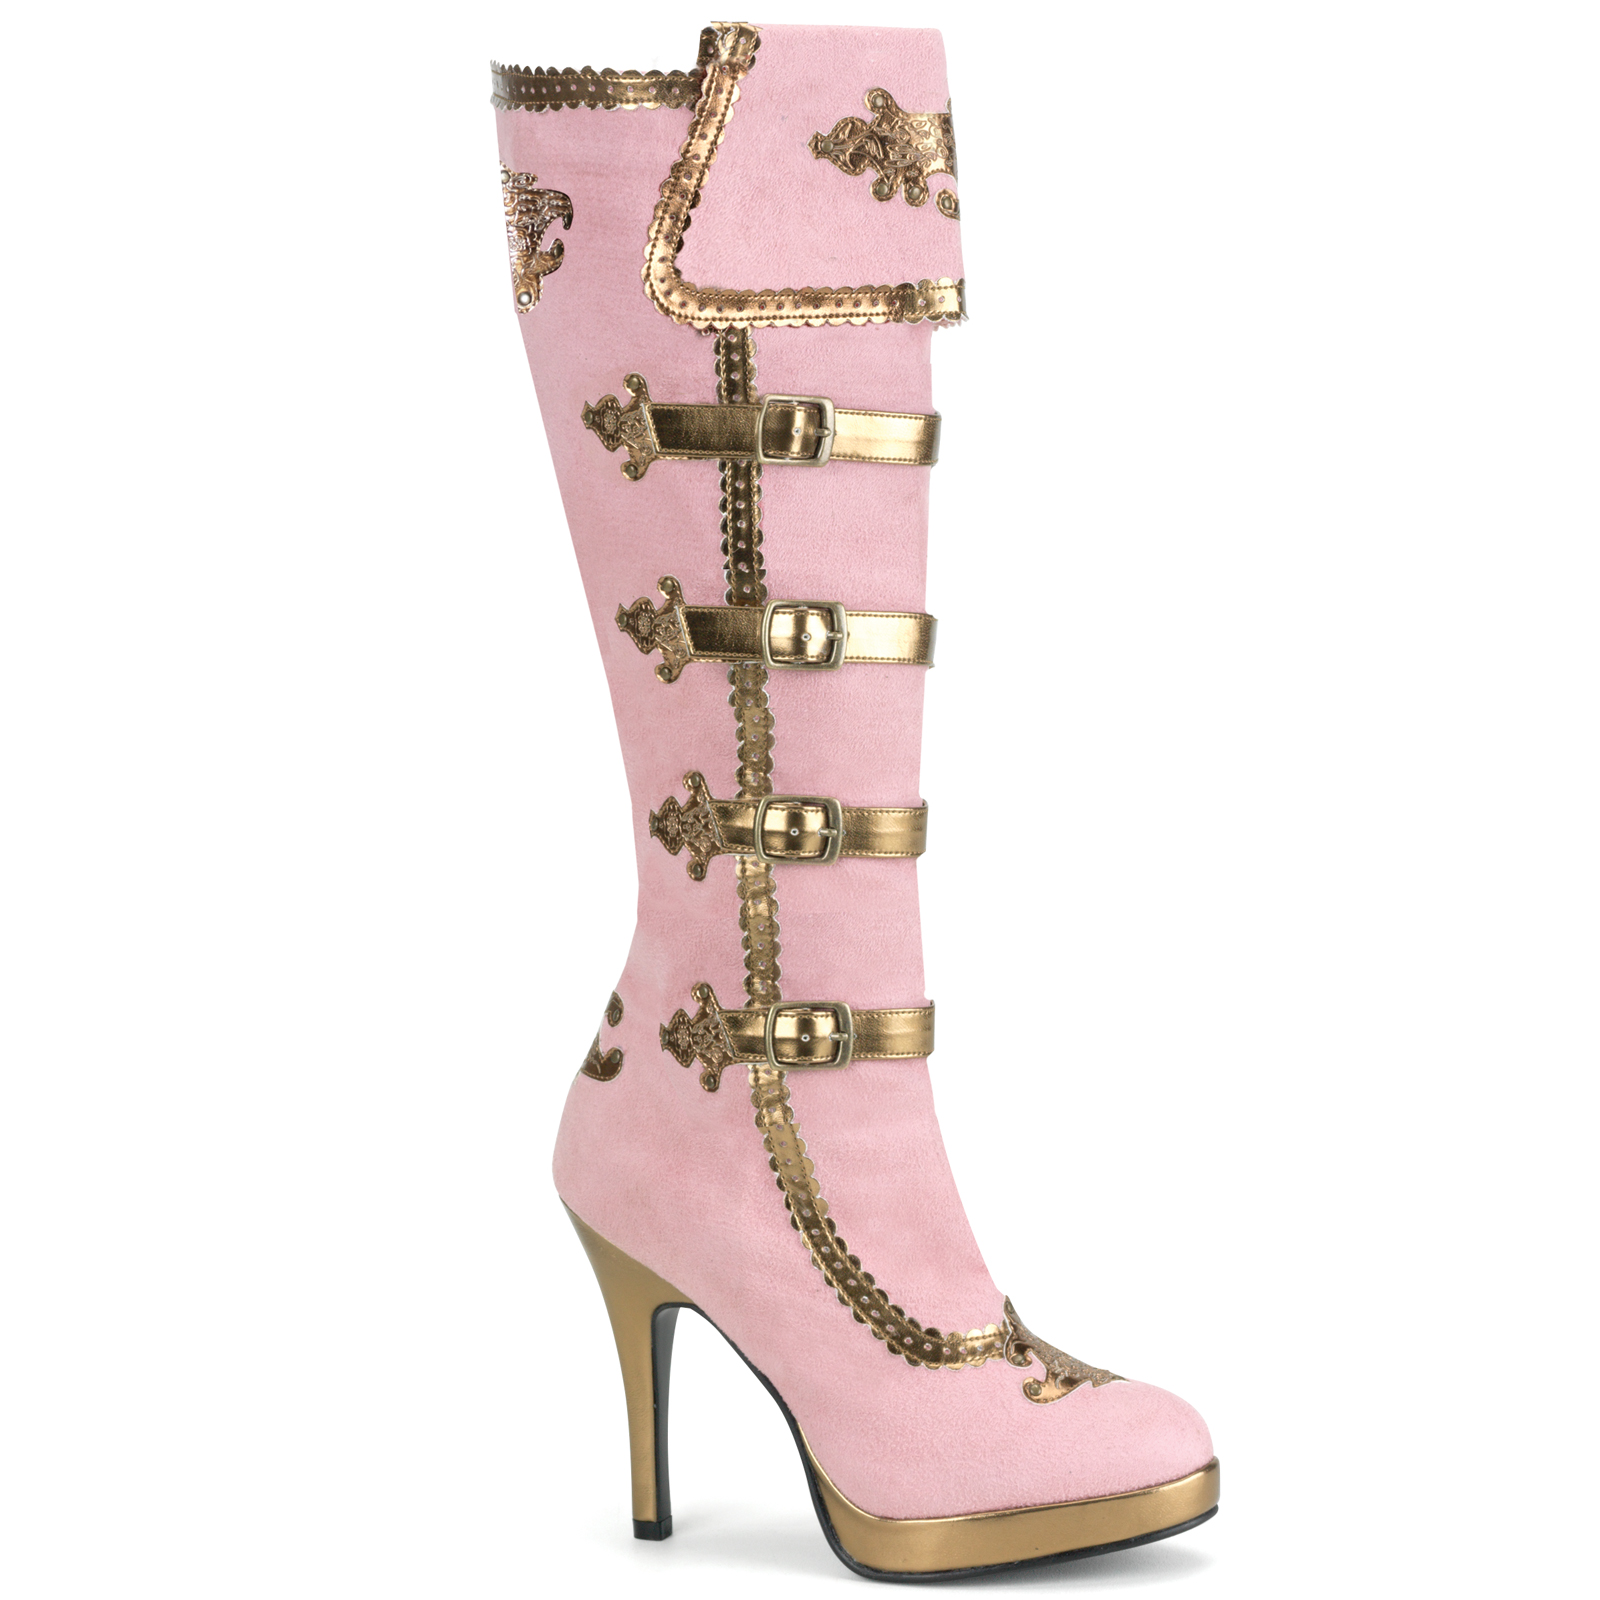 Pleaser Women's Carnival Boots Adult (Pink/Gold) - 10